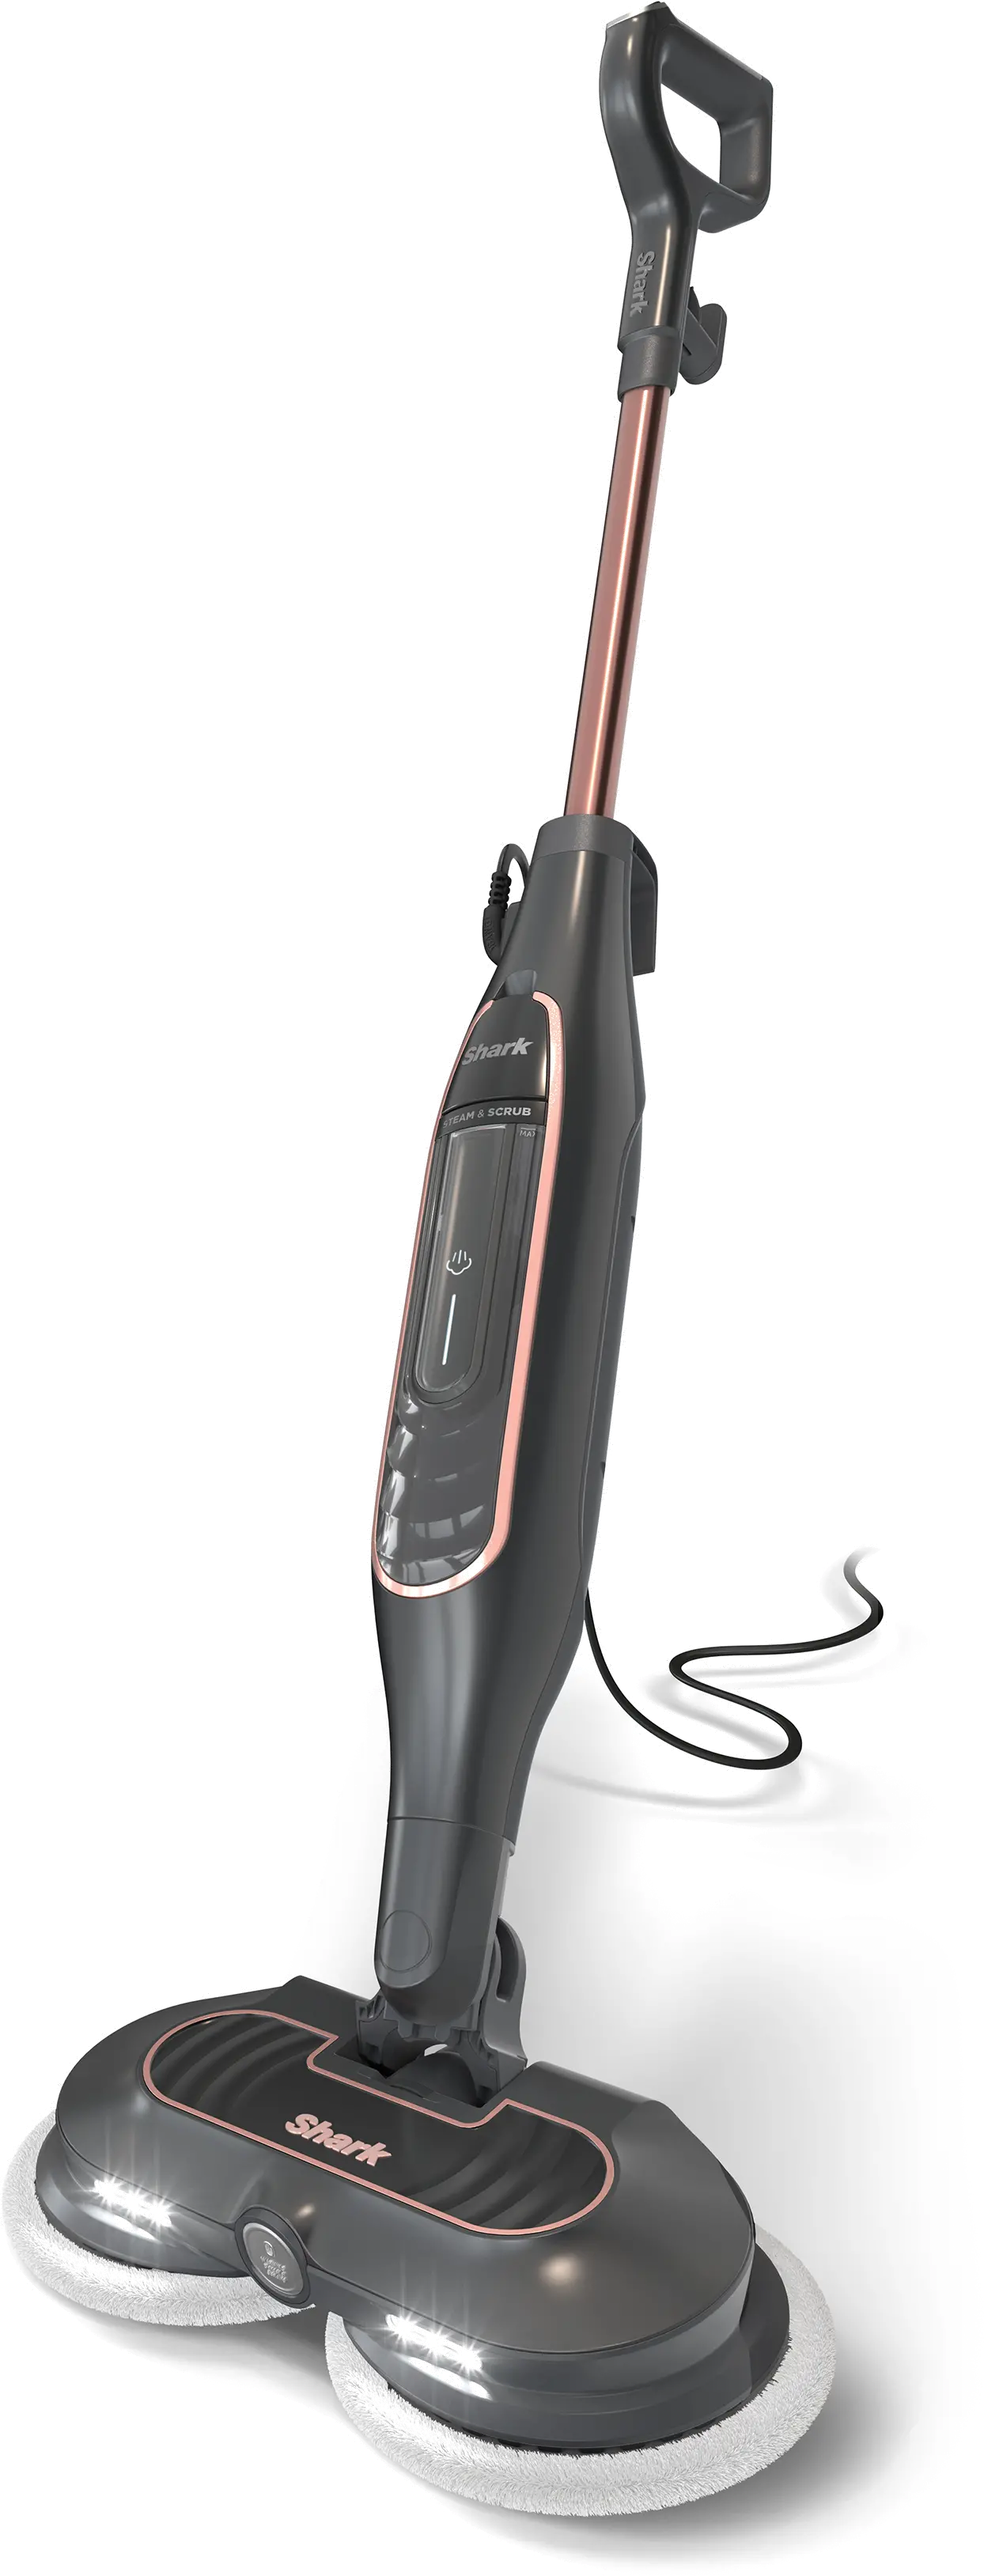 Shark Steam Mop for deep cleaning and sanitizing hard floors